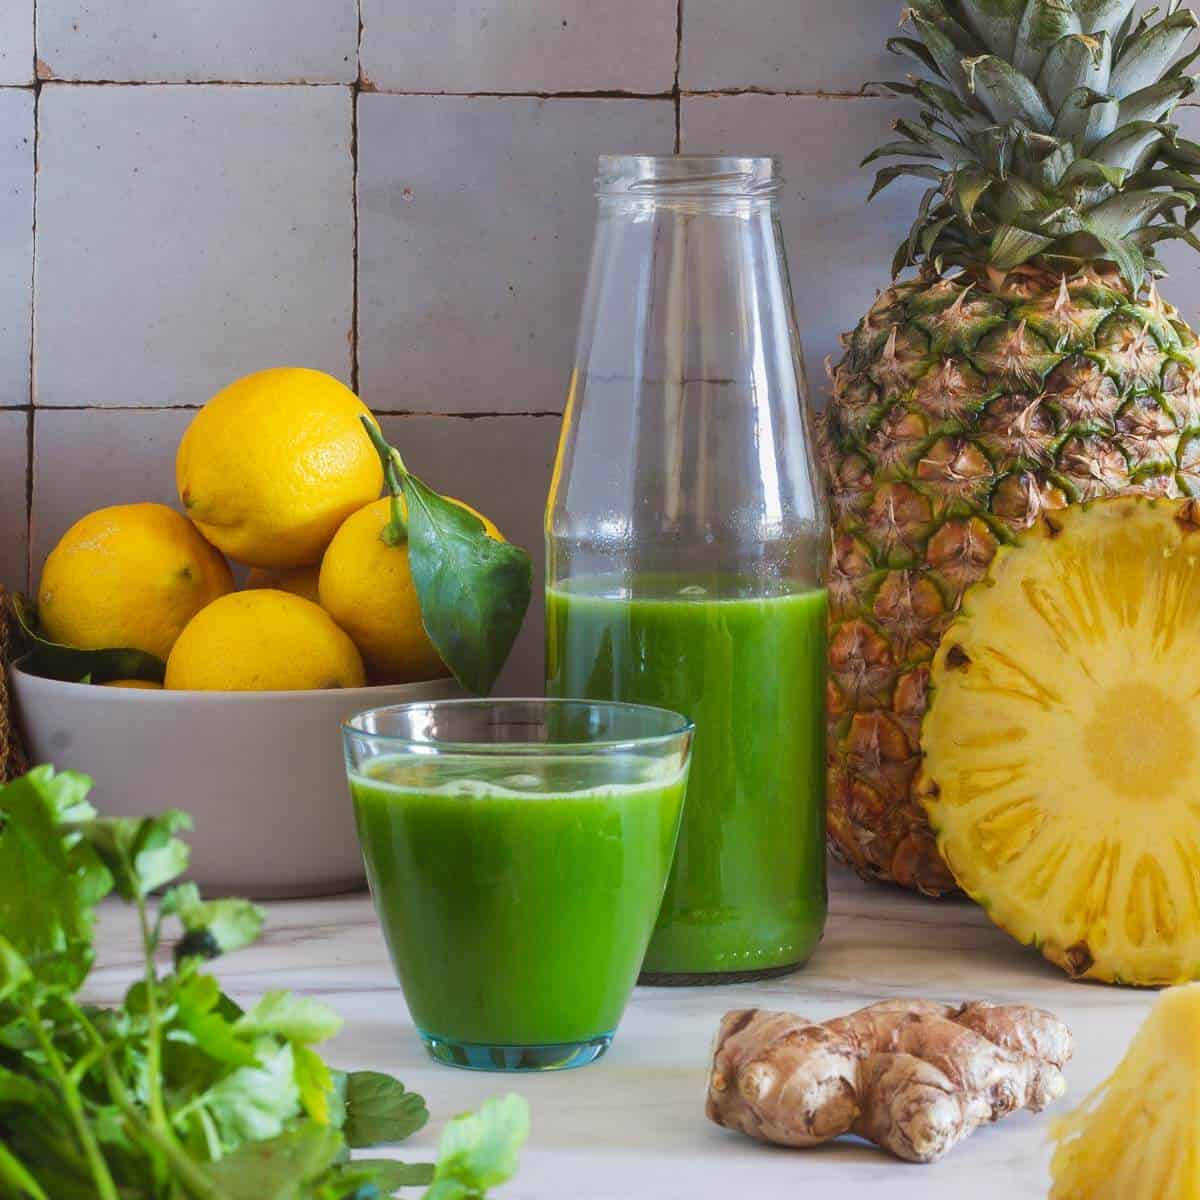 Pineapple Cucumber Ginger Lemon Weight Loss Juice | Our Plant-Based World